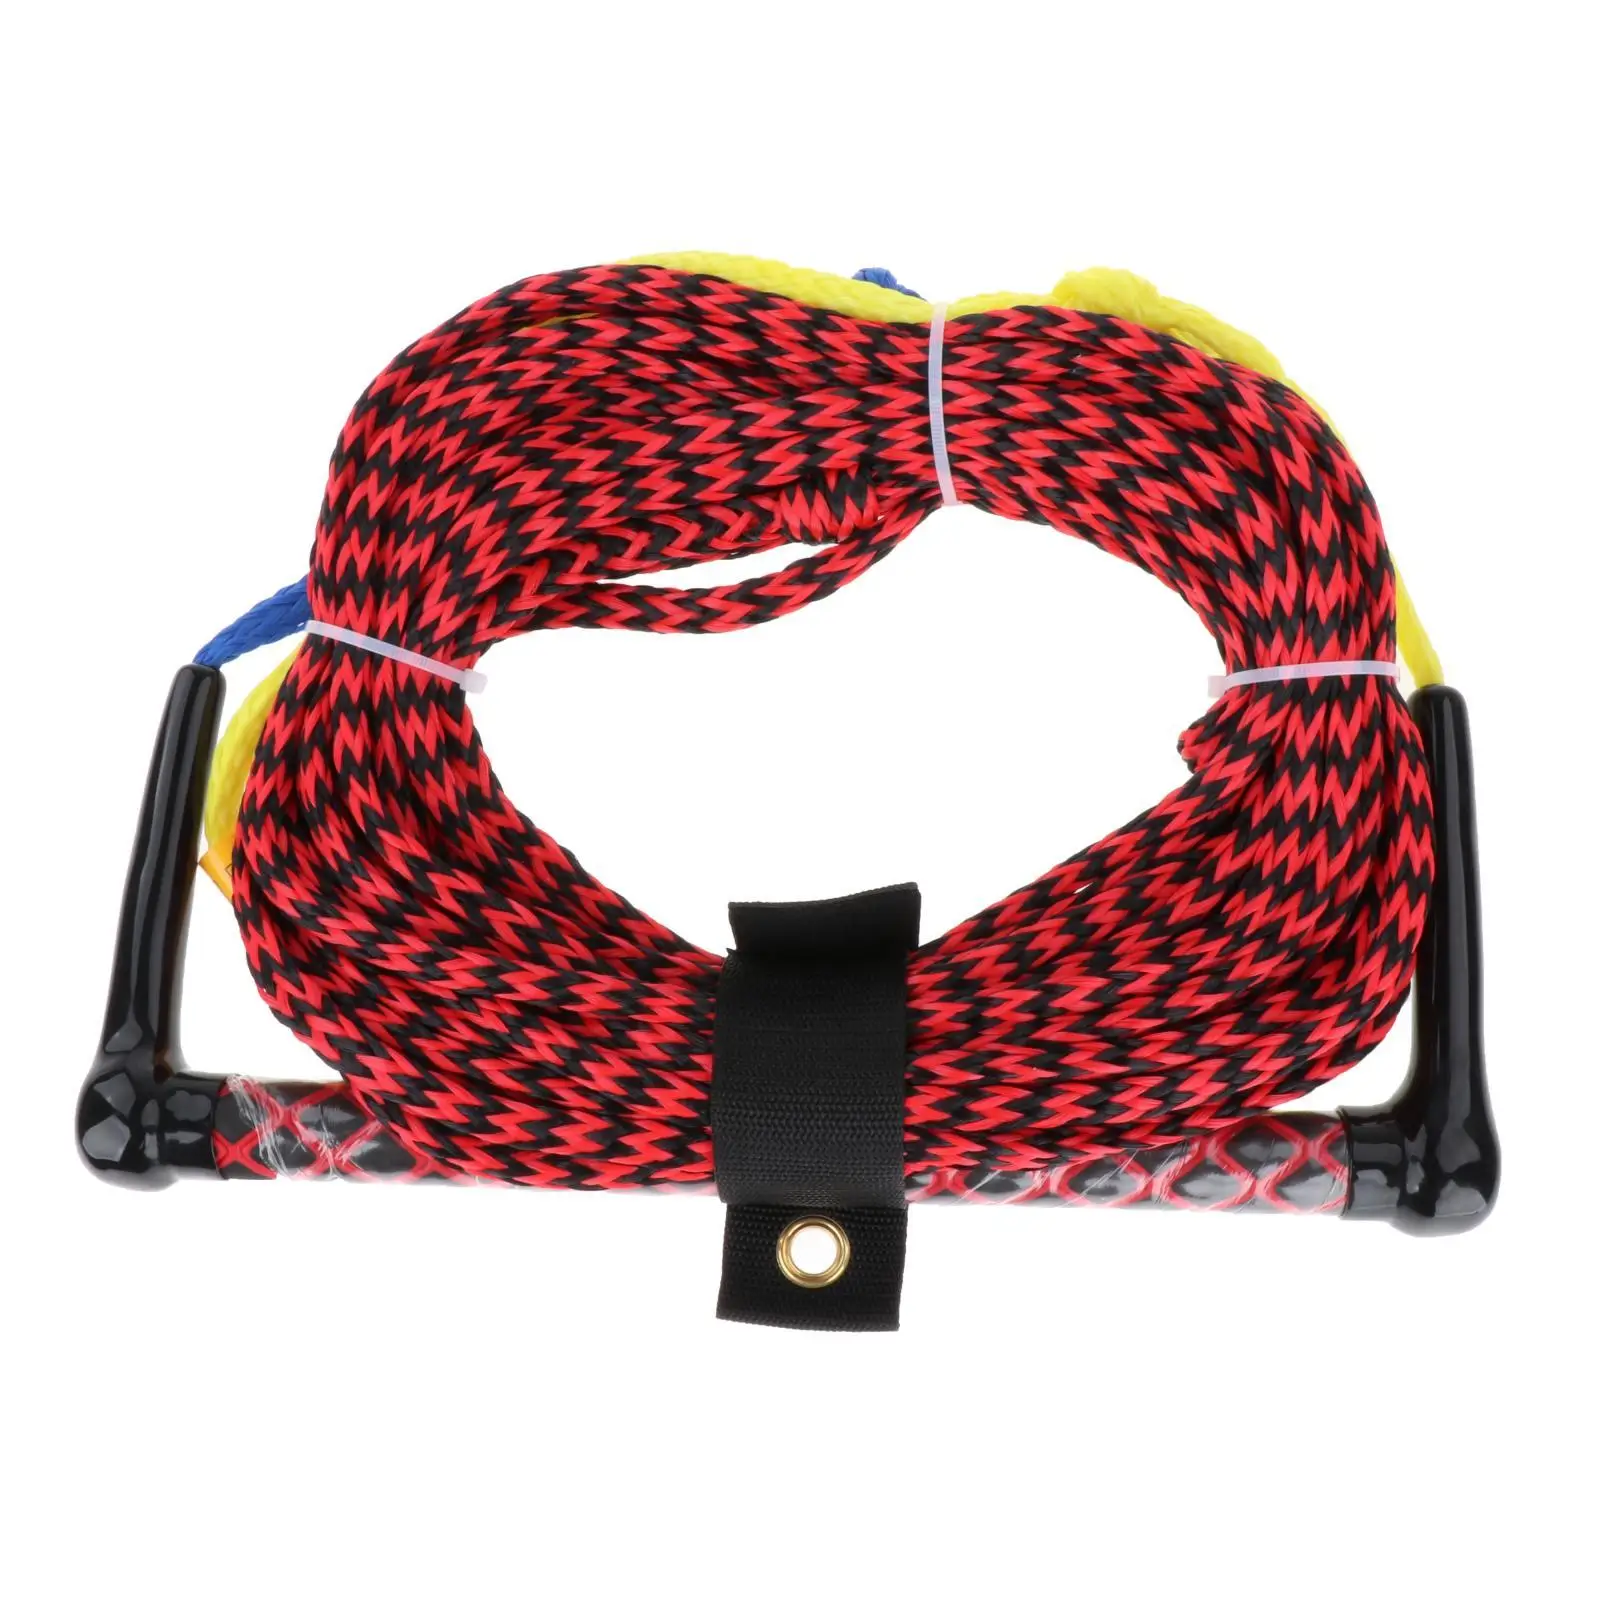 Water Skiing Surf Rope Floatable Tow Surfing Tow Trow Ropes Line Tow Harness Rope w/ Handle for Training Knee Board Motorboat